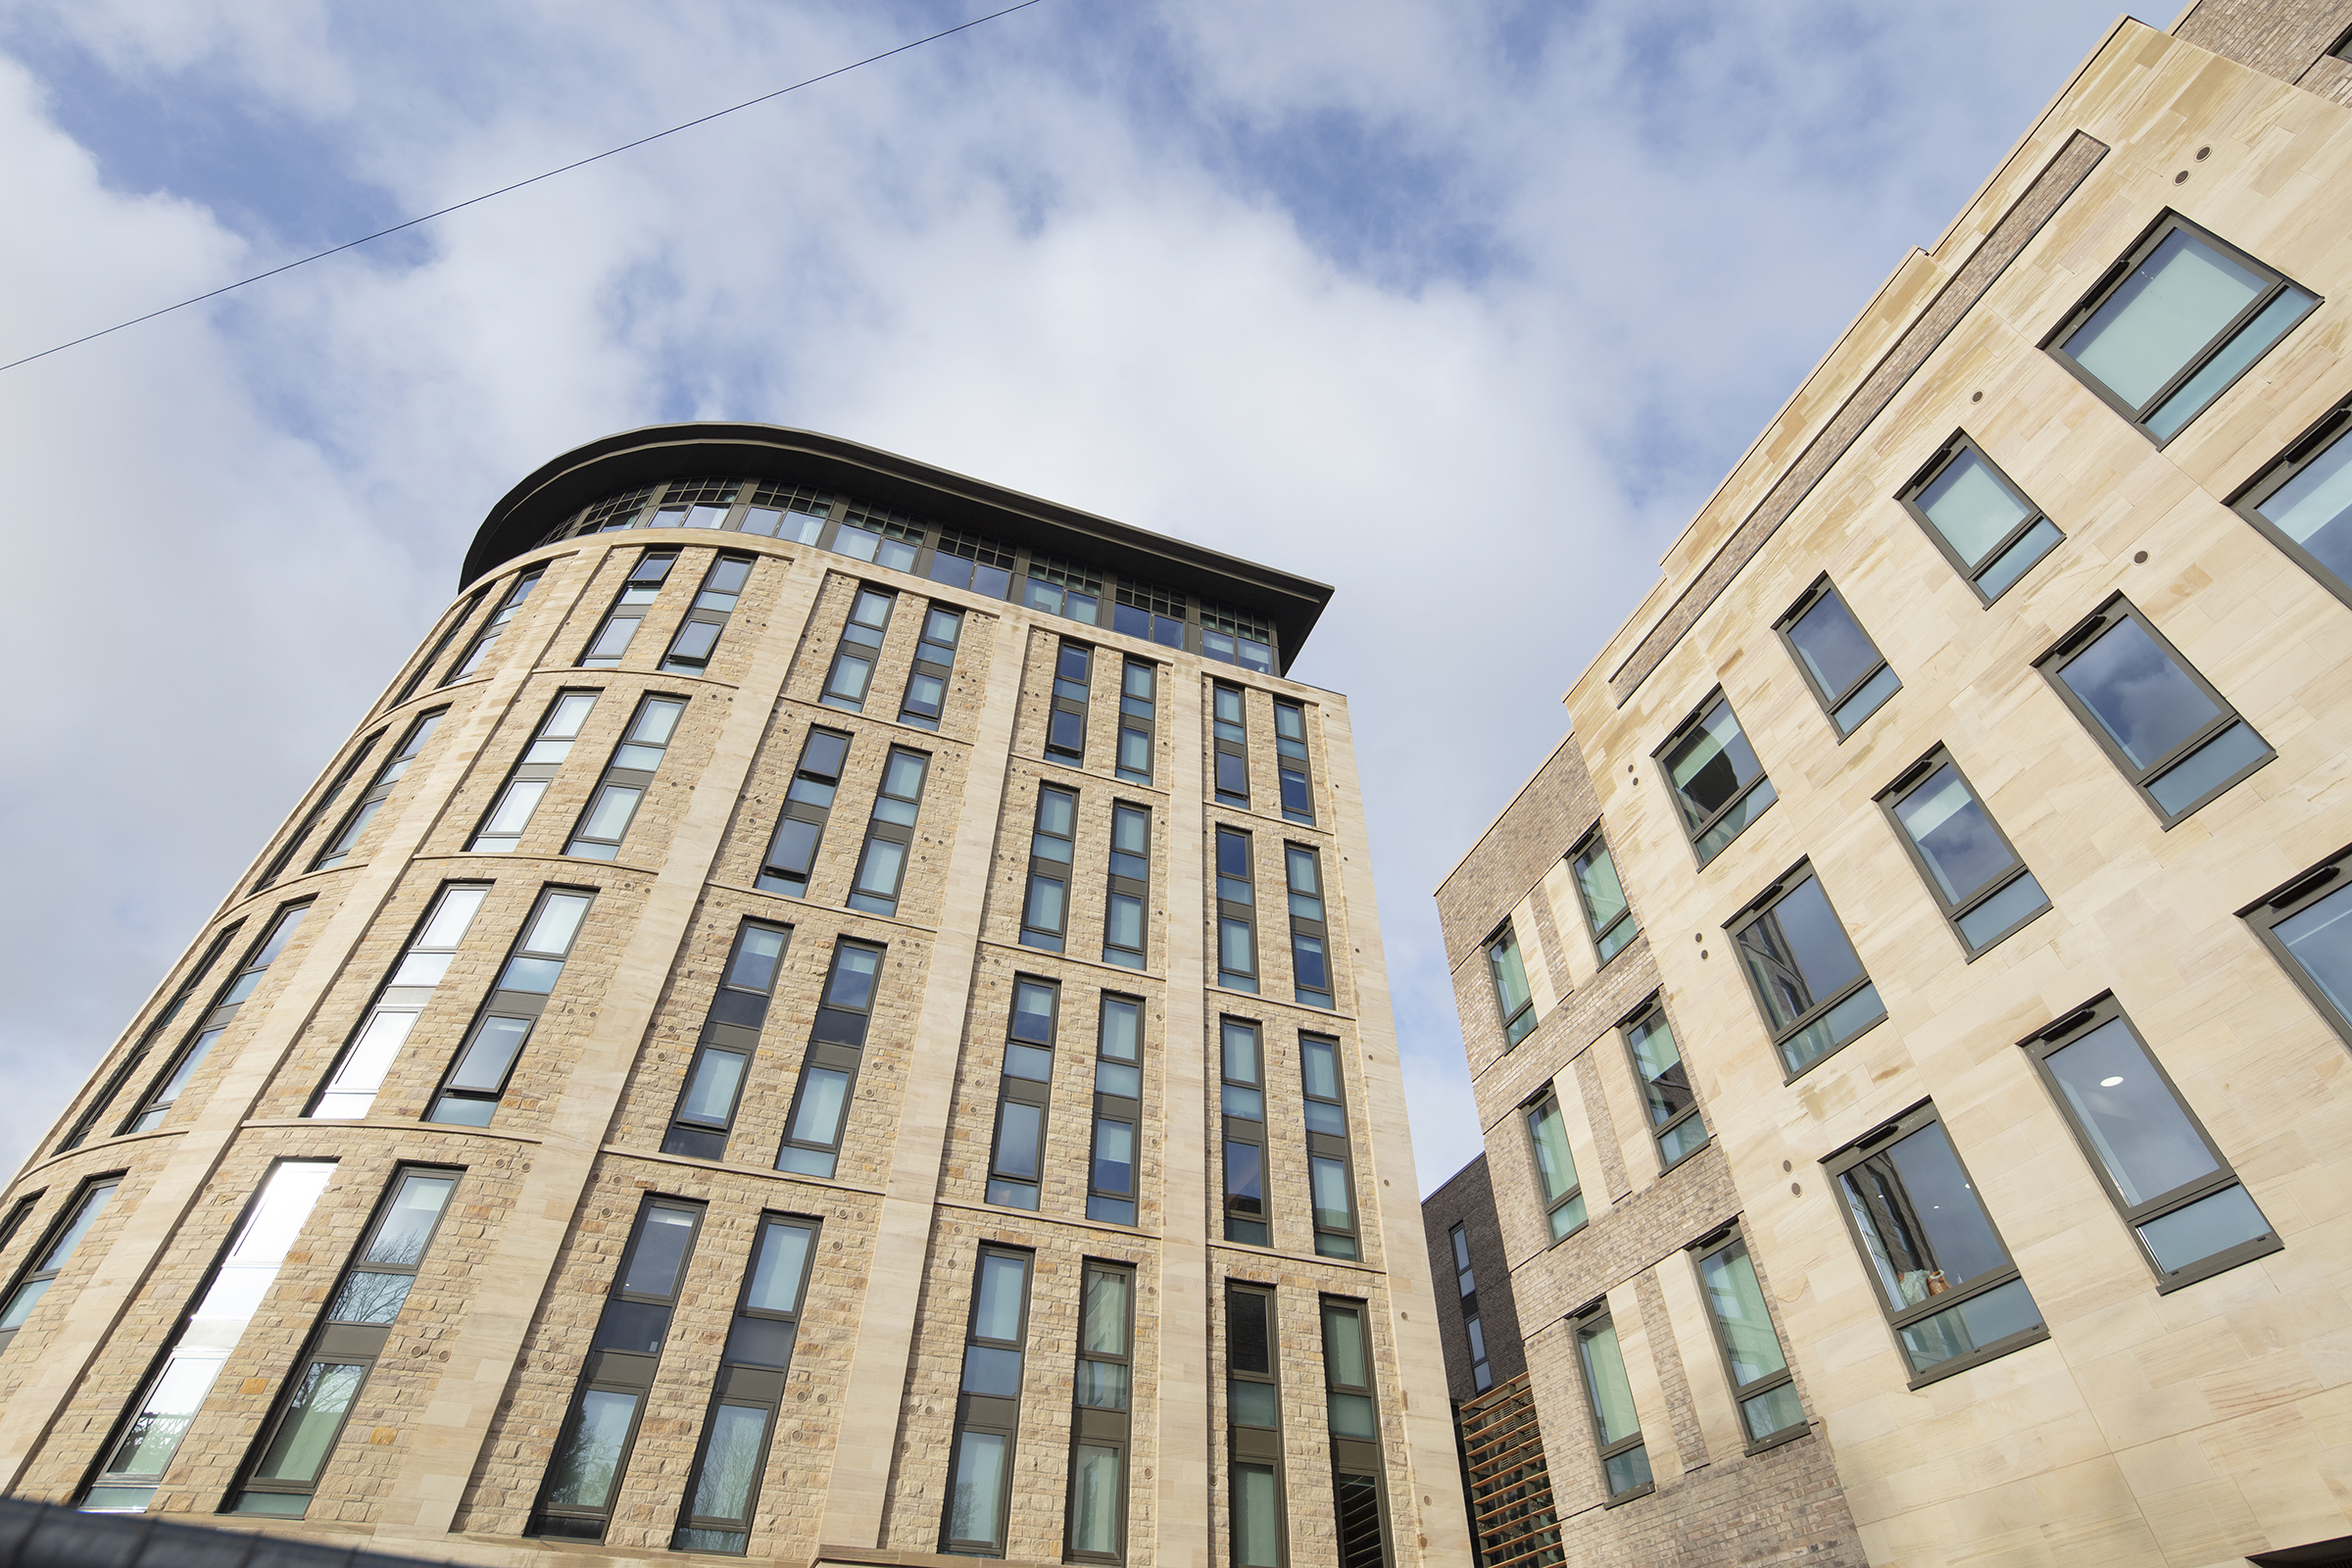 TECHNAL Systems on show at Lancaster’s New Student Village